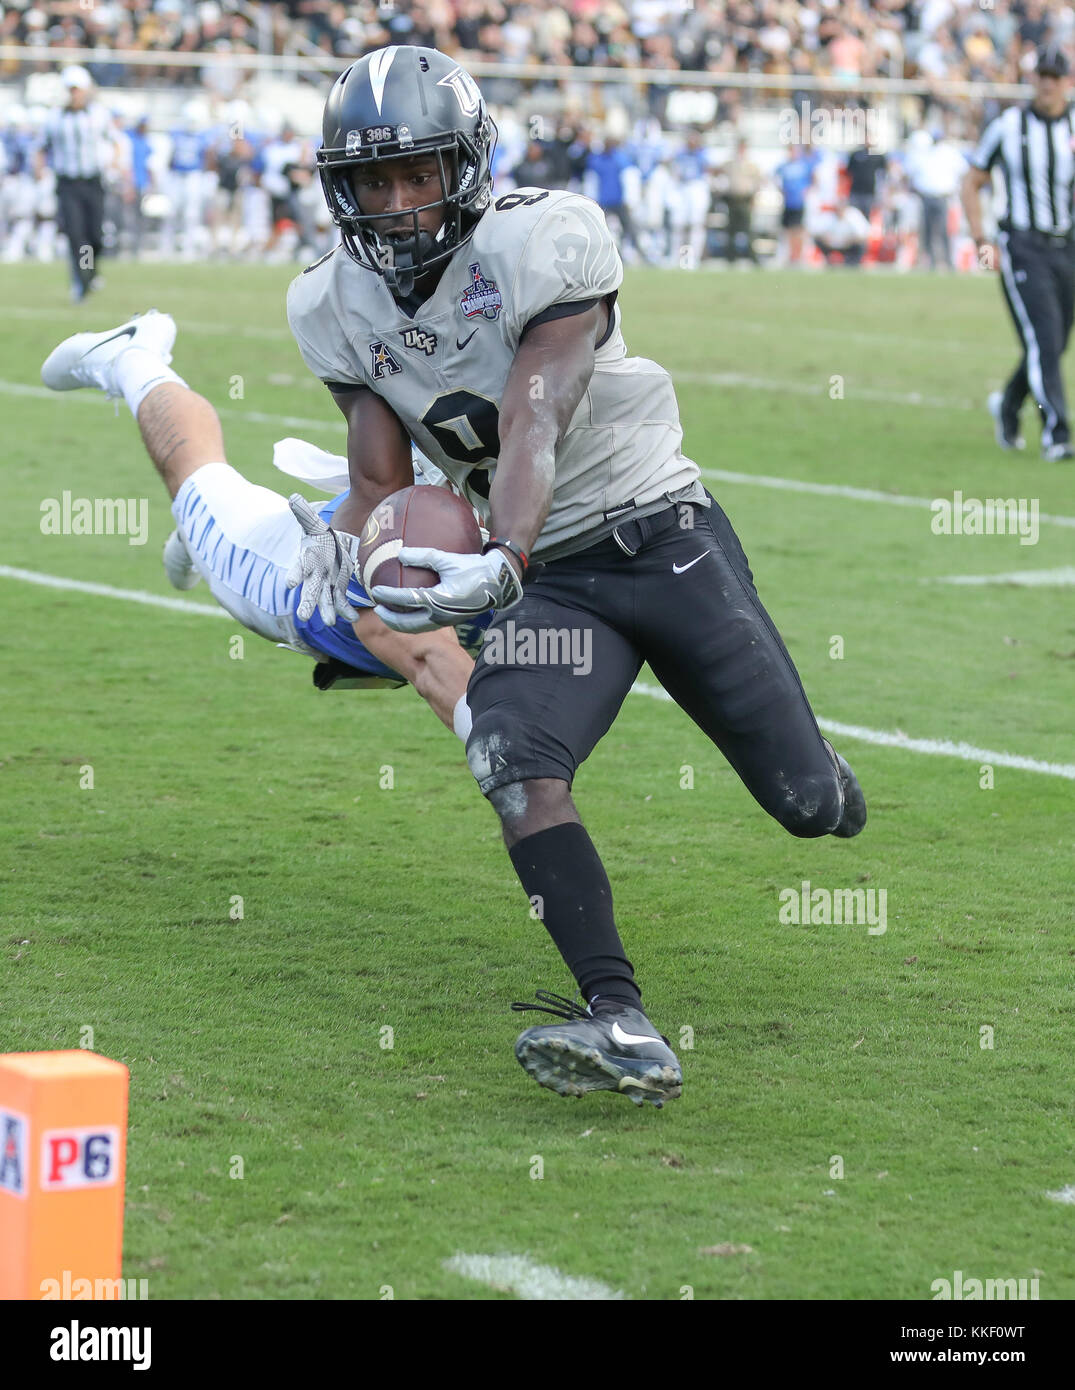 UCF RB Adrian Killins Jr. 2nd Dec, 2017. #9 reaches for the pylon to score a touchdown during overtime of the AAC Championship football game between the UCF Knights and the Memphis Tigers at the Spectrum Stadium in Orlando, FL. Kyle Okita/CSM/Alamy Live News Stock Photo